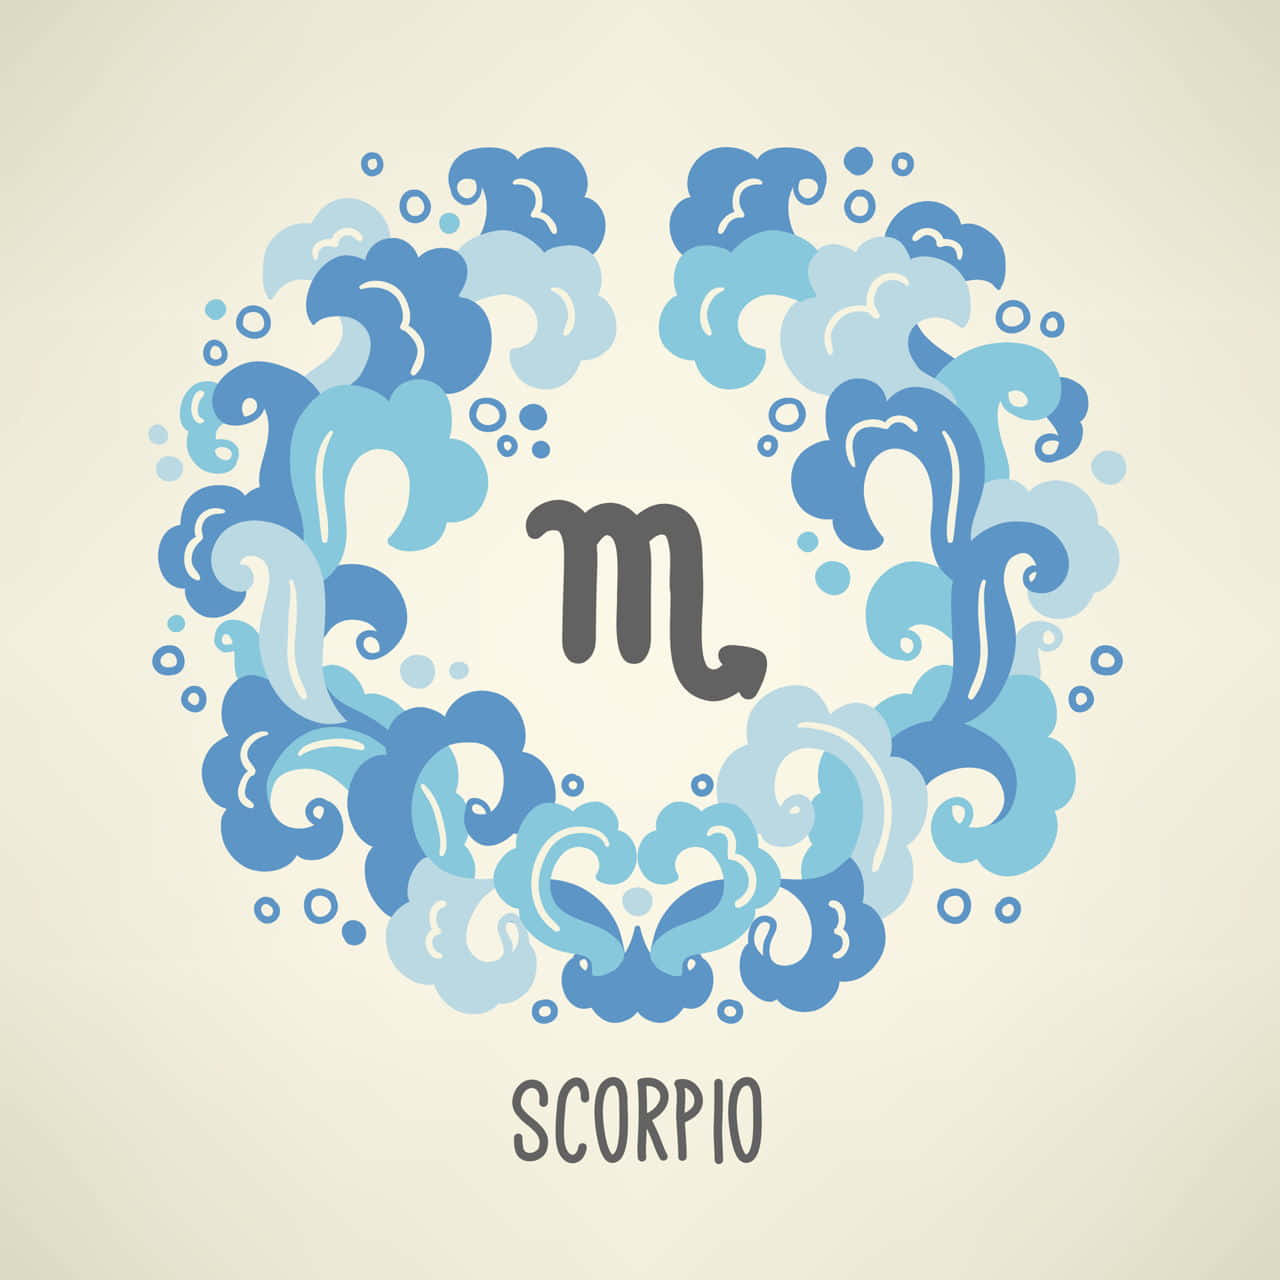 Scorpio Zodiac Sign With Waves And Waves